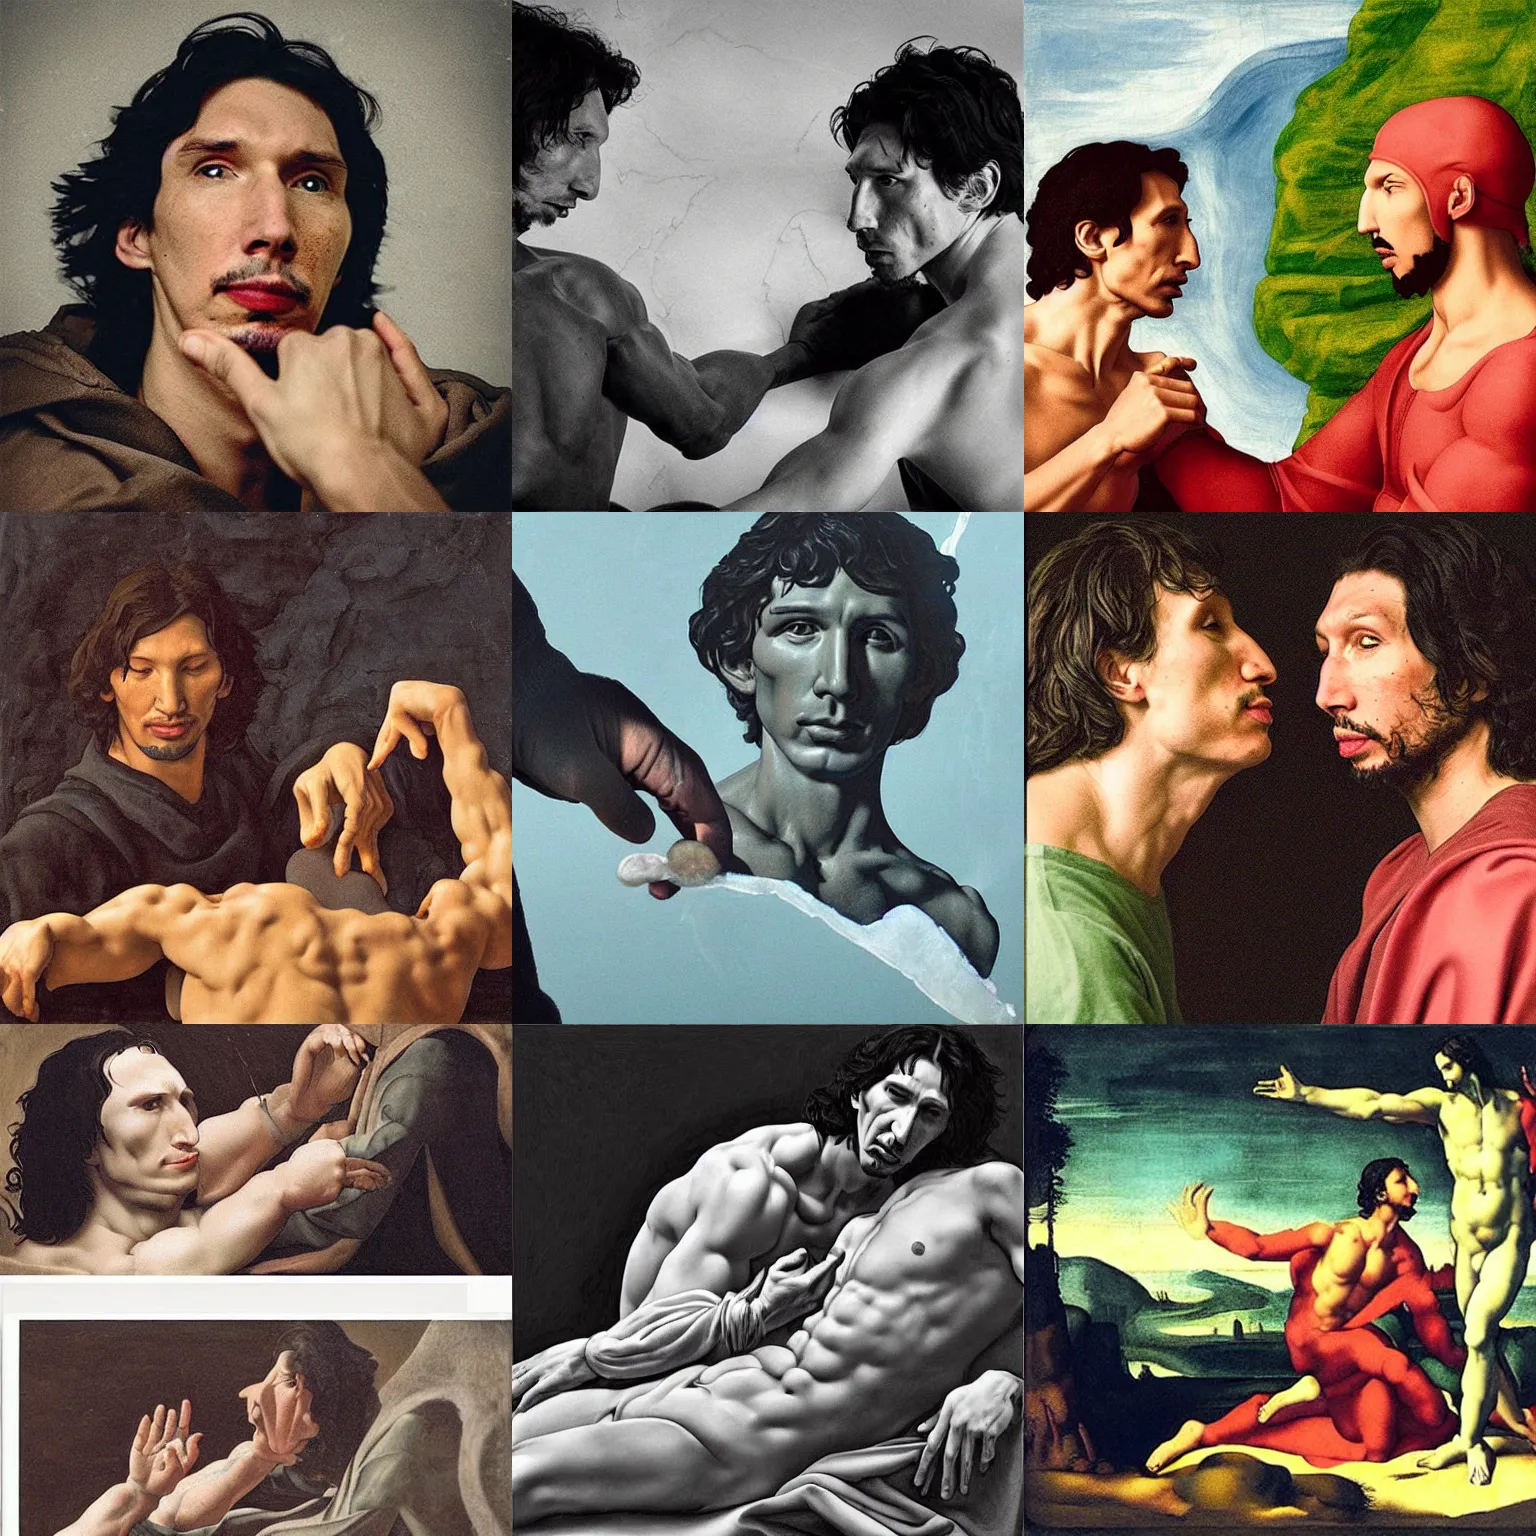 Prompt: “Michelangelo’s The Creation of Adam Driver”